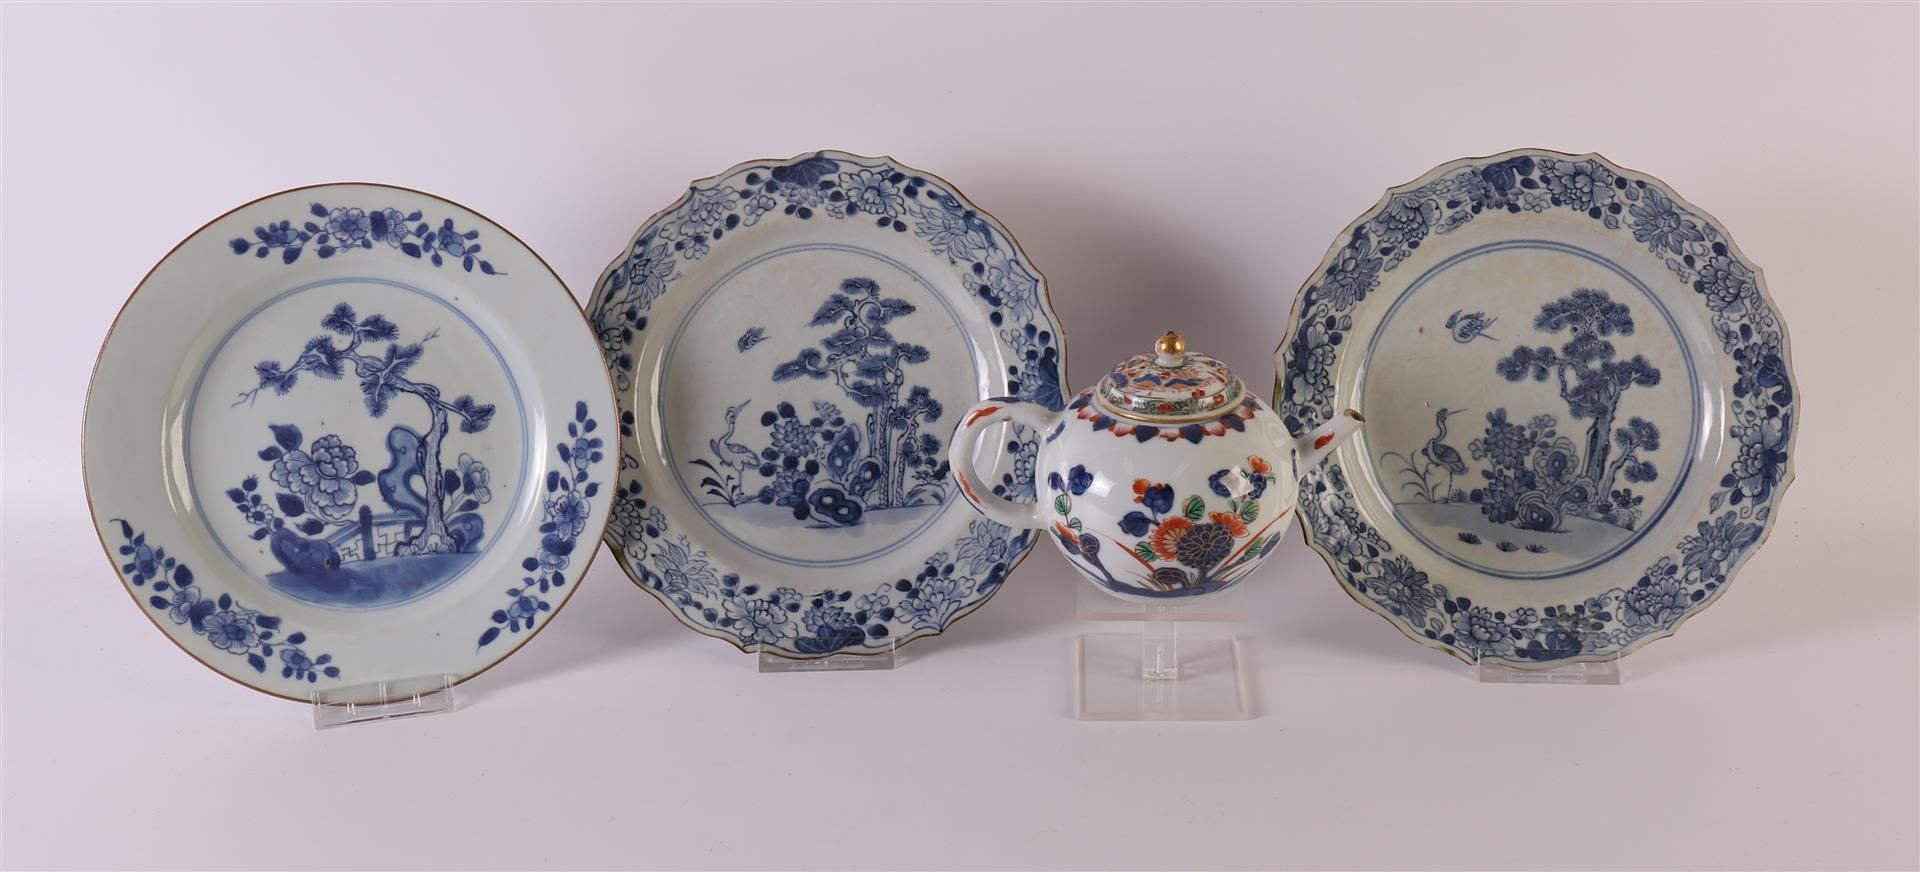 A pair of contoured blue/white porcelain plates, China, Qianlong, 2nd half 18th century. Blue